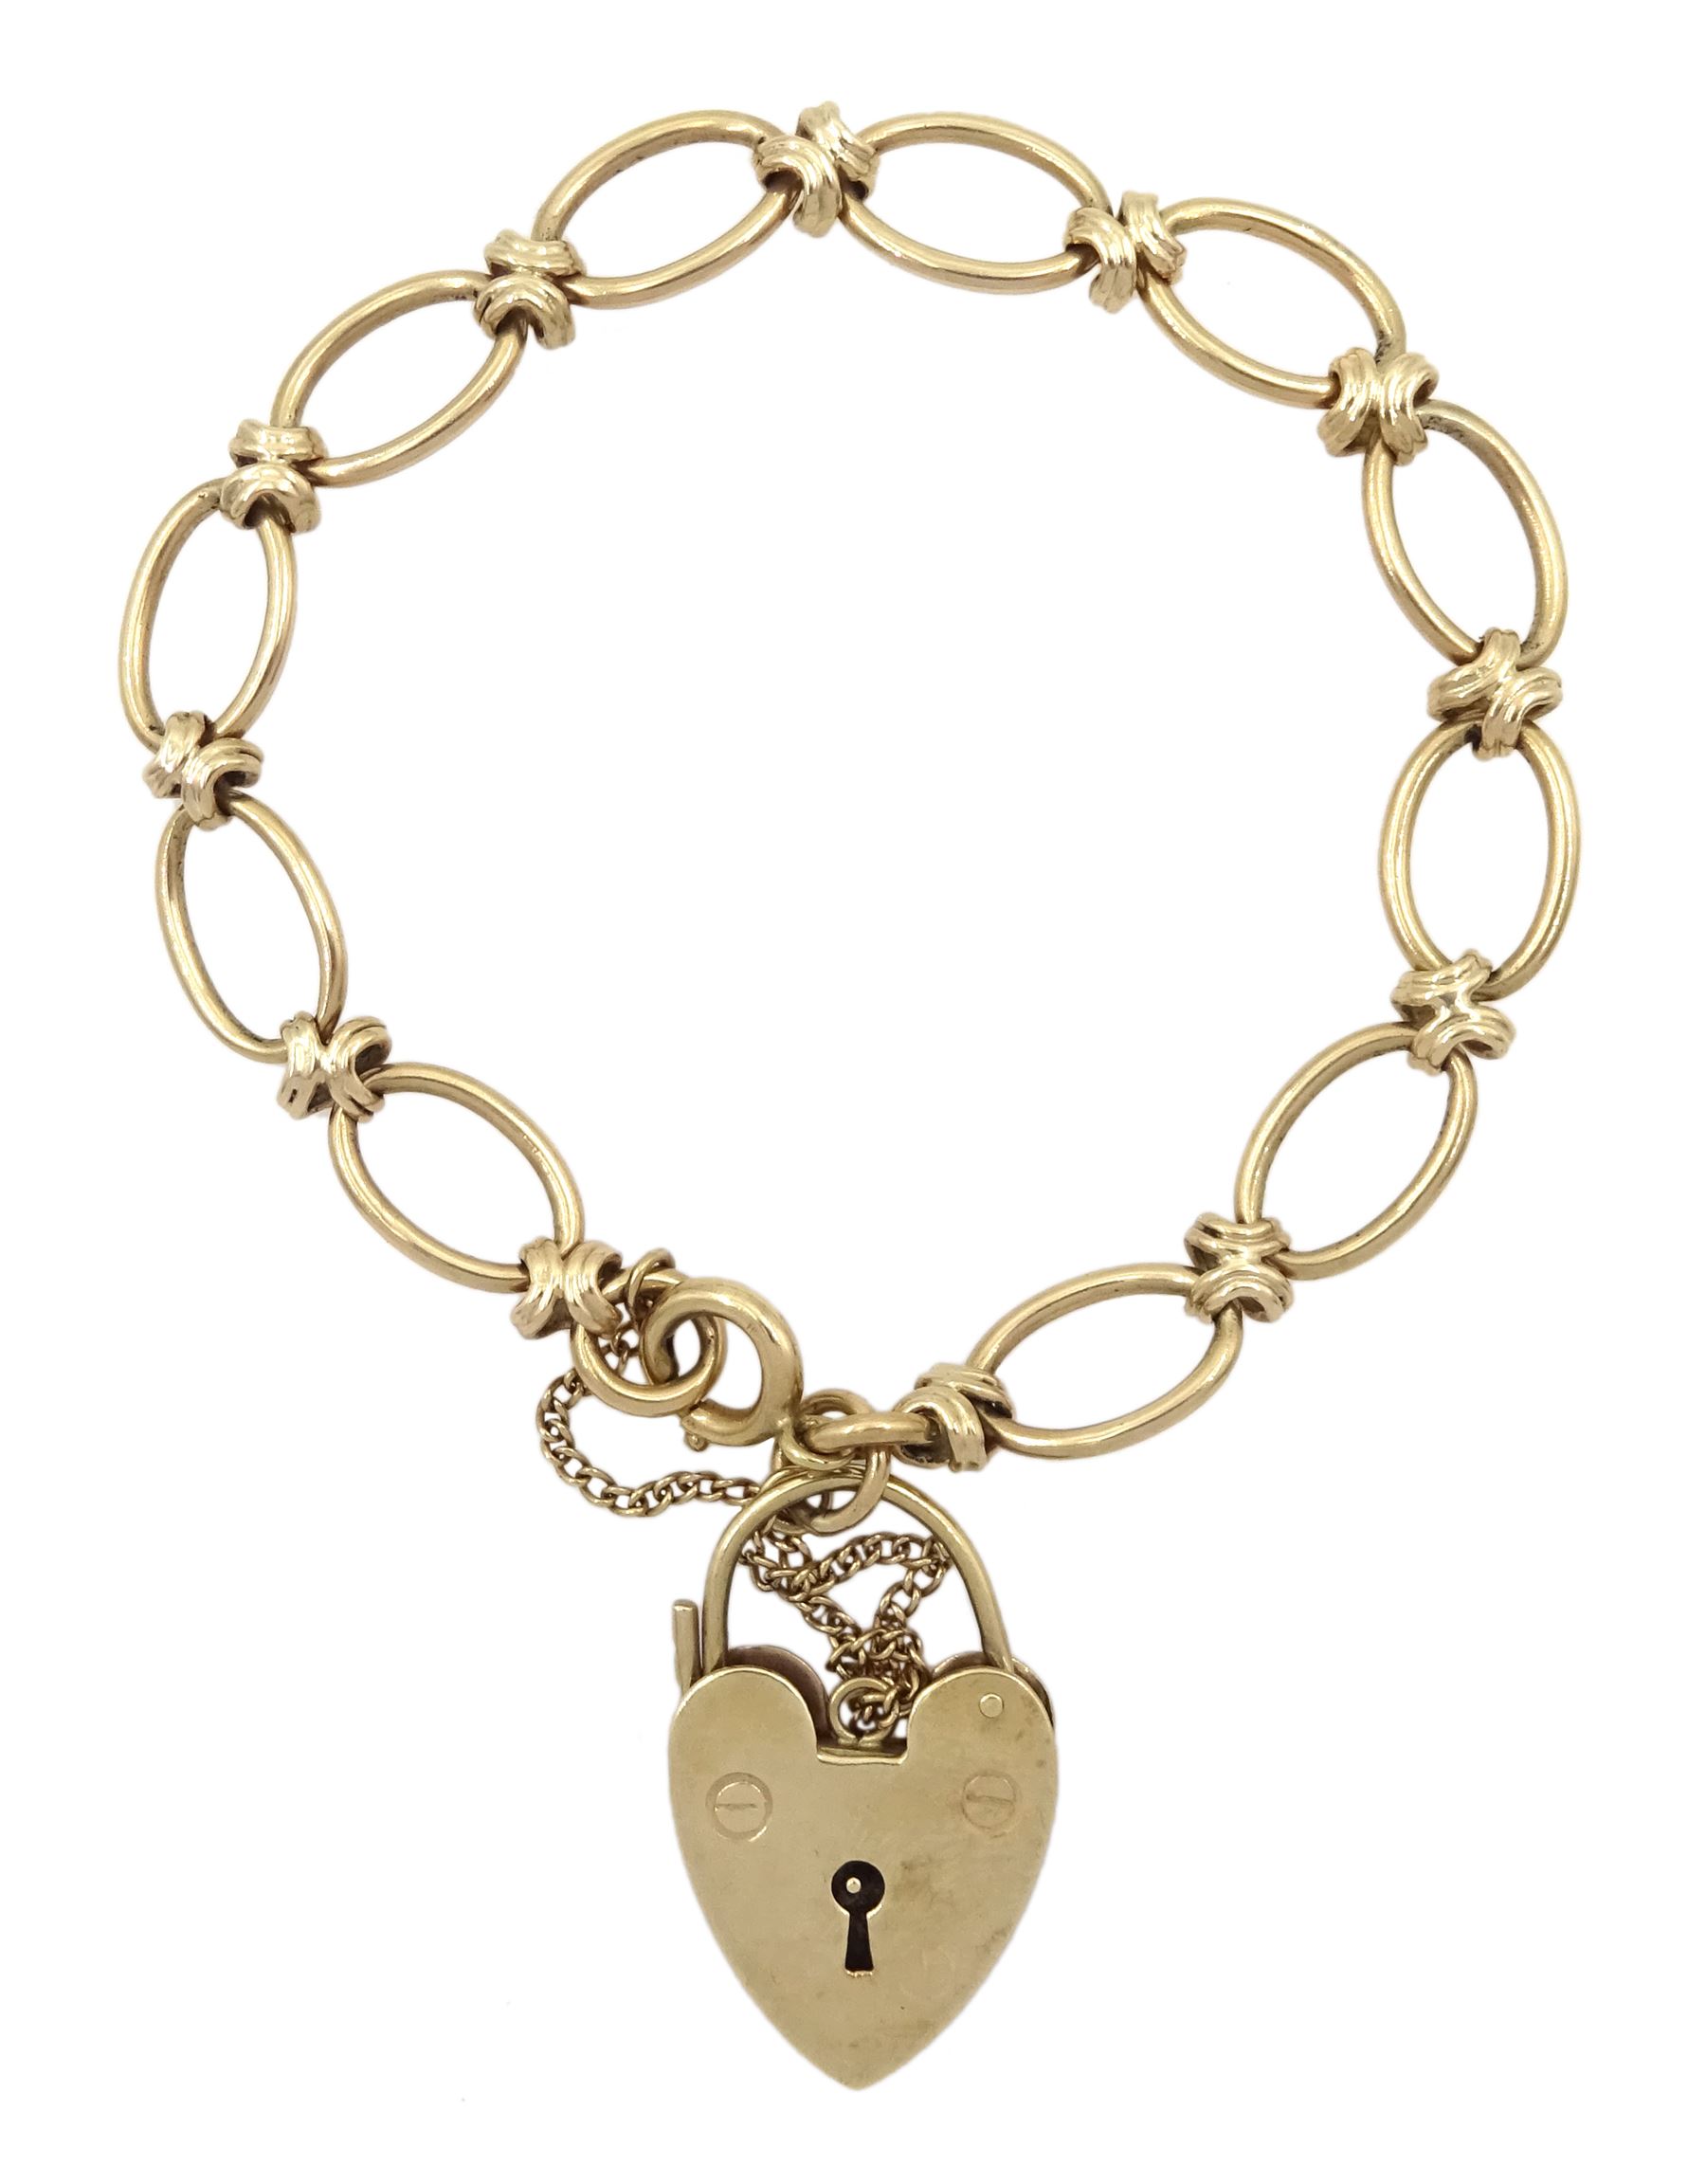 9ct gold oval link bracelet with heart locket clasp